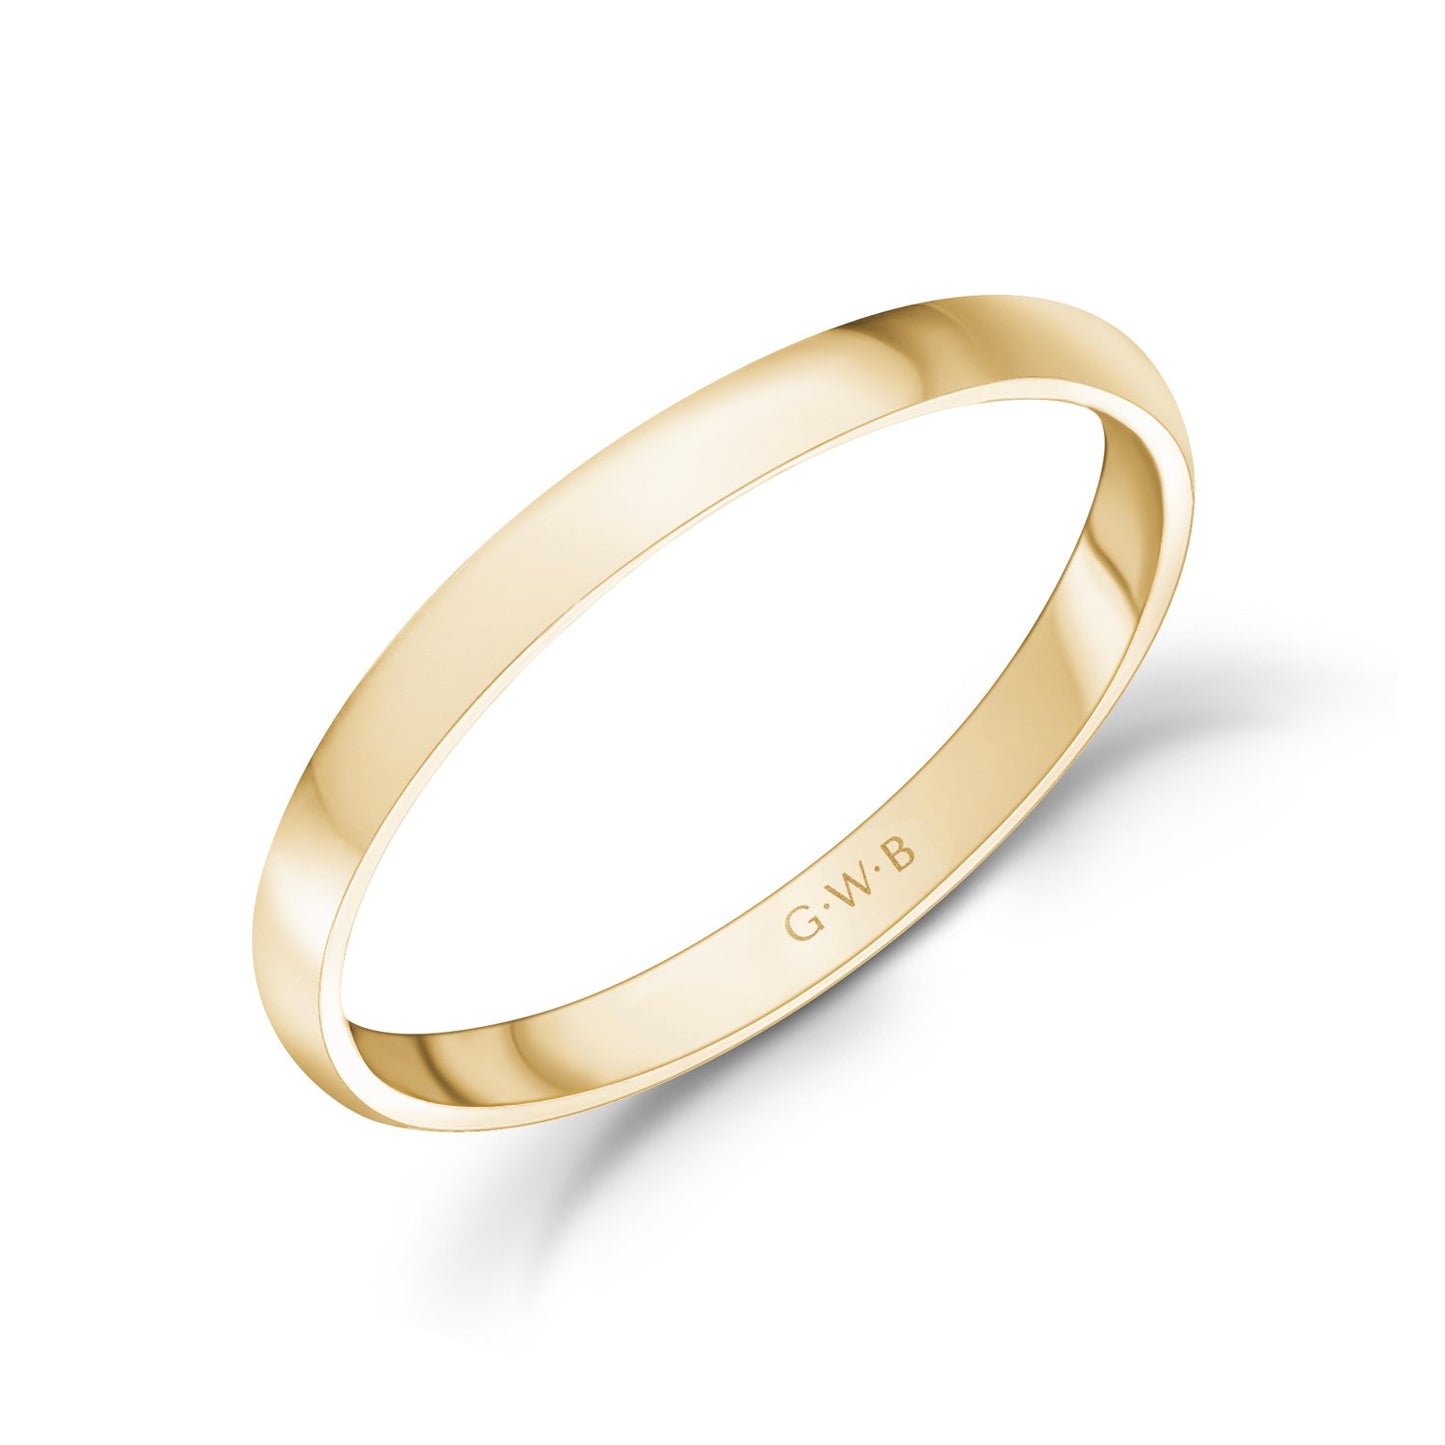 2mm 14K Gold High Polished Dome Wedding Band - G.W Bands